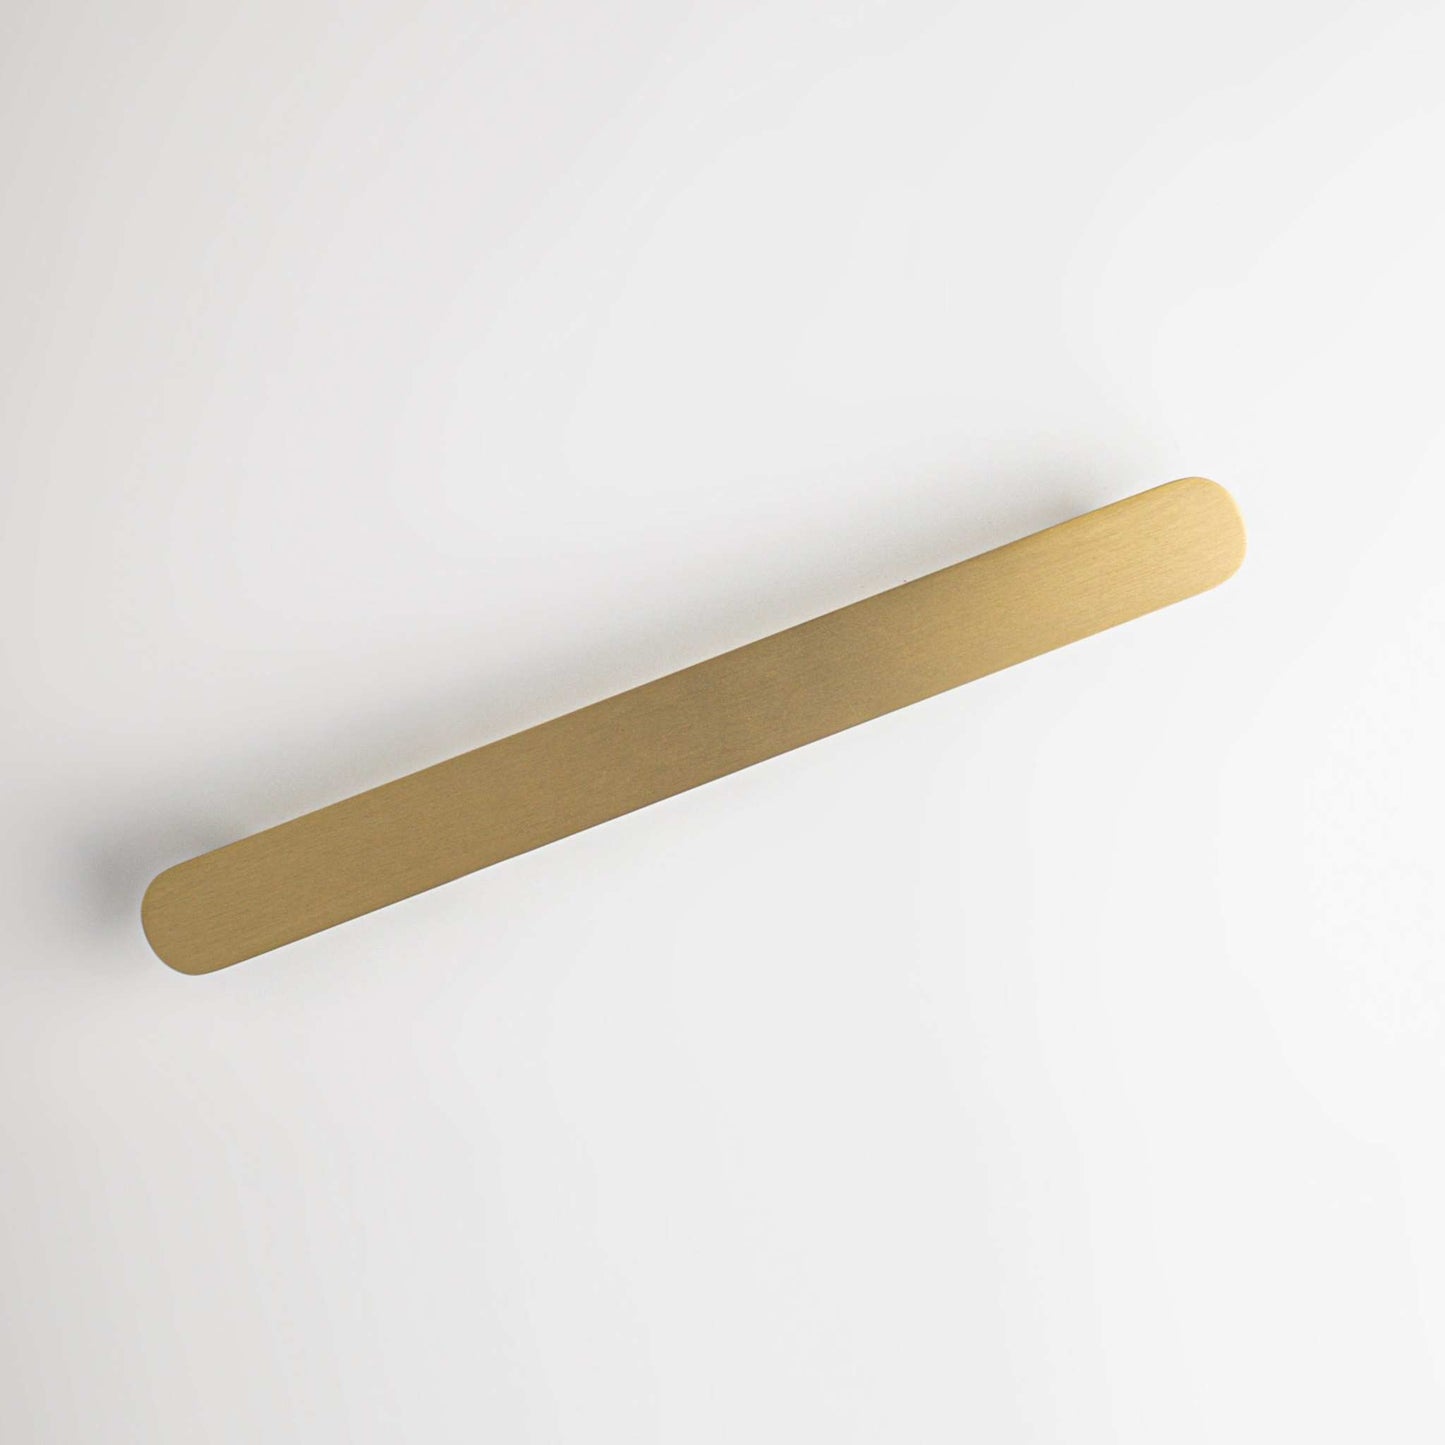 Orbital, Solid Brass Appliance Pulls


Our Orbital Pull adds a touch of simplicity to any contemporary design project. The solid brass construction has an incredible weight in the hand, ensuring it wilappliance pullOrbital, Solid Brass Appliance Pulls